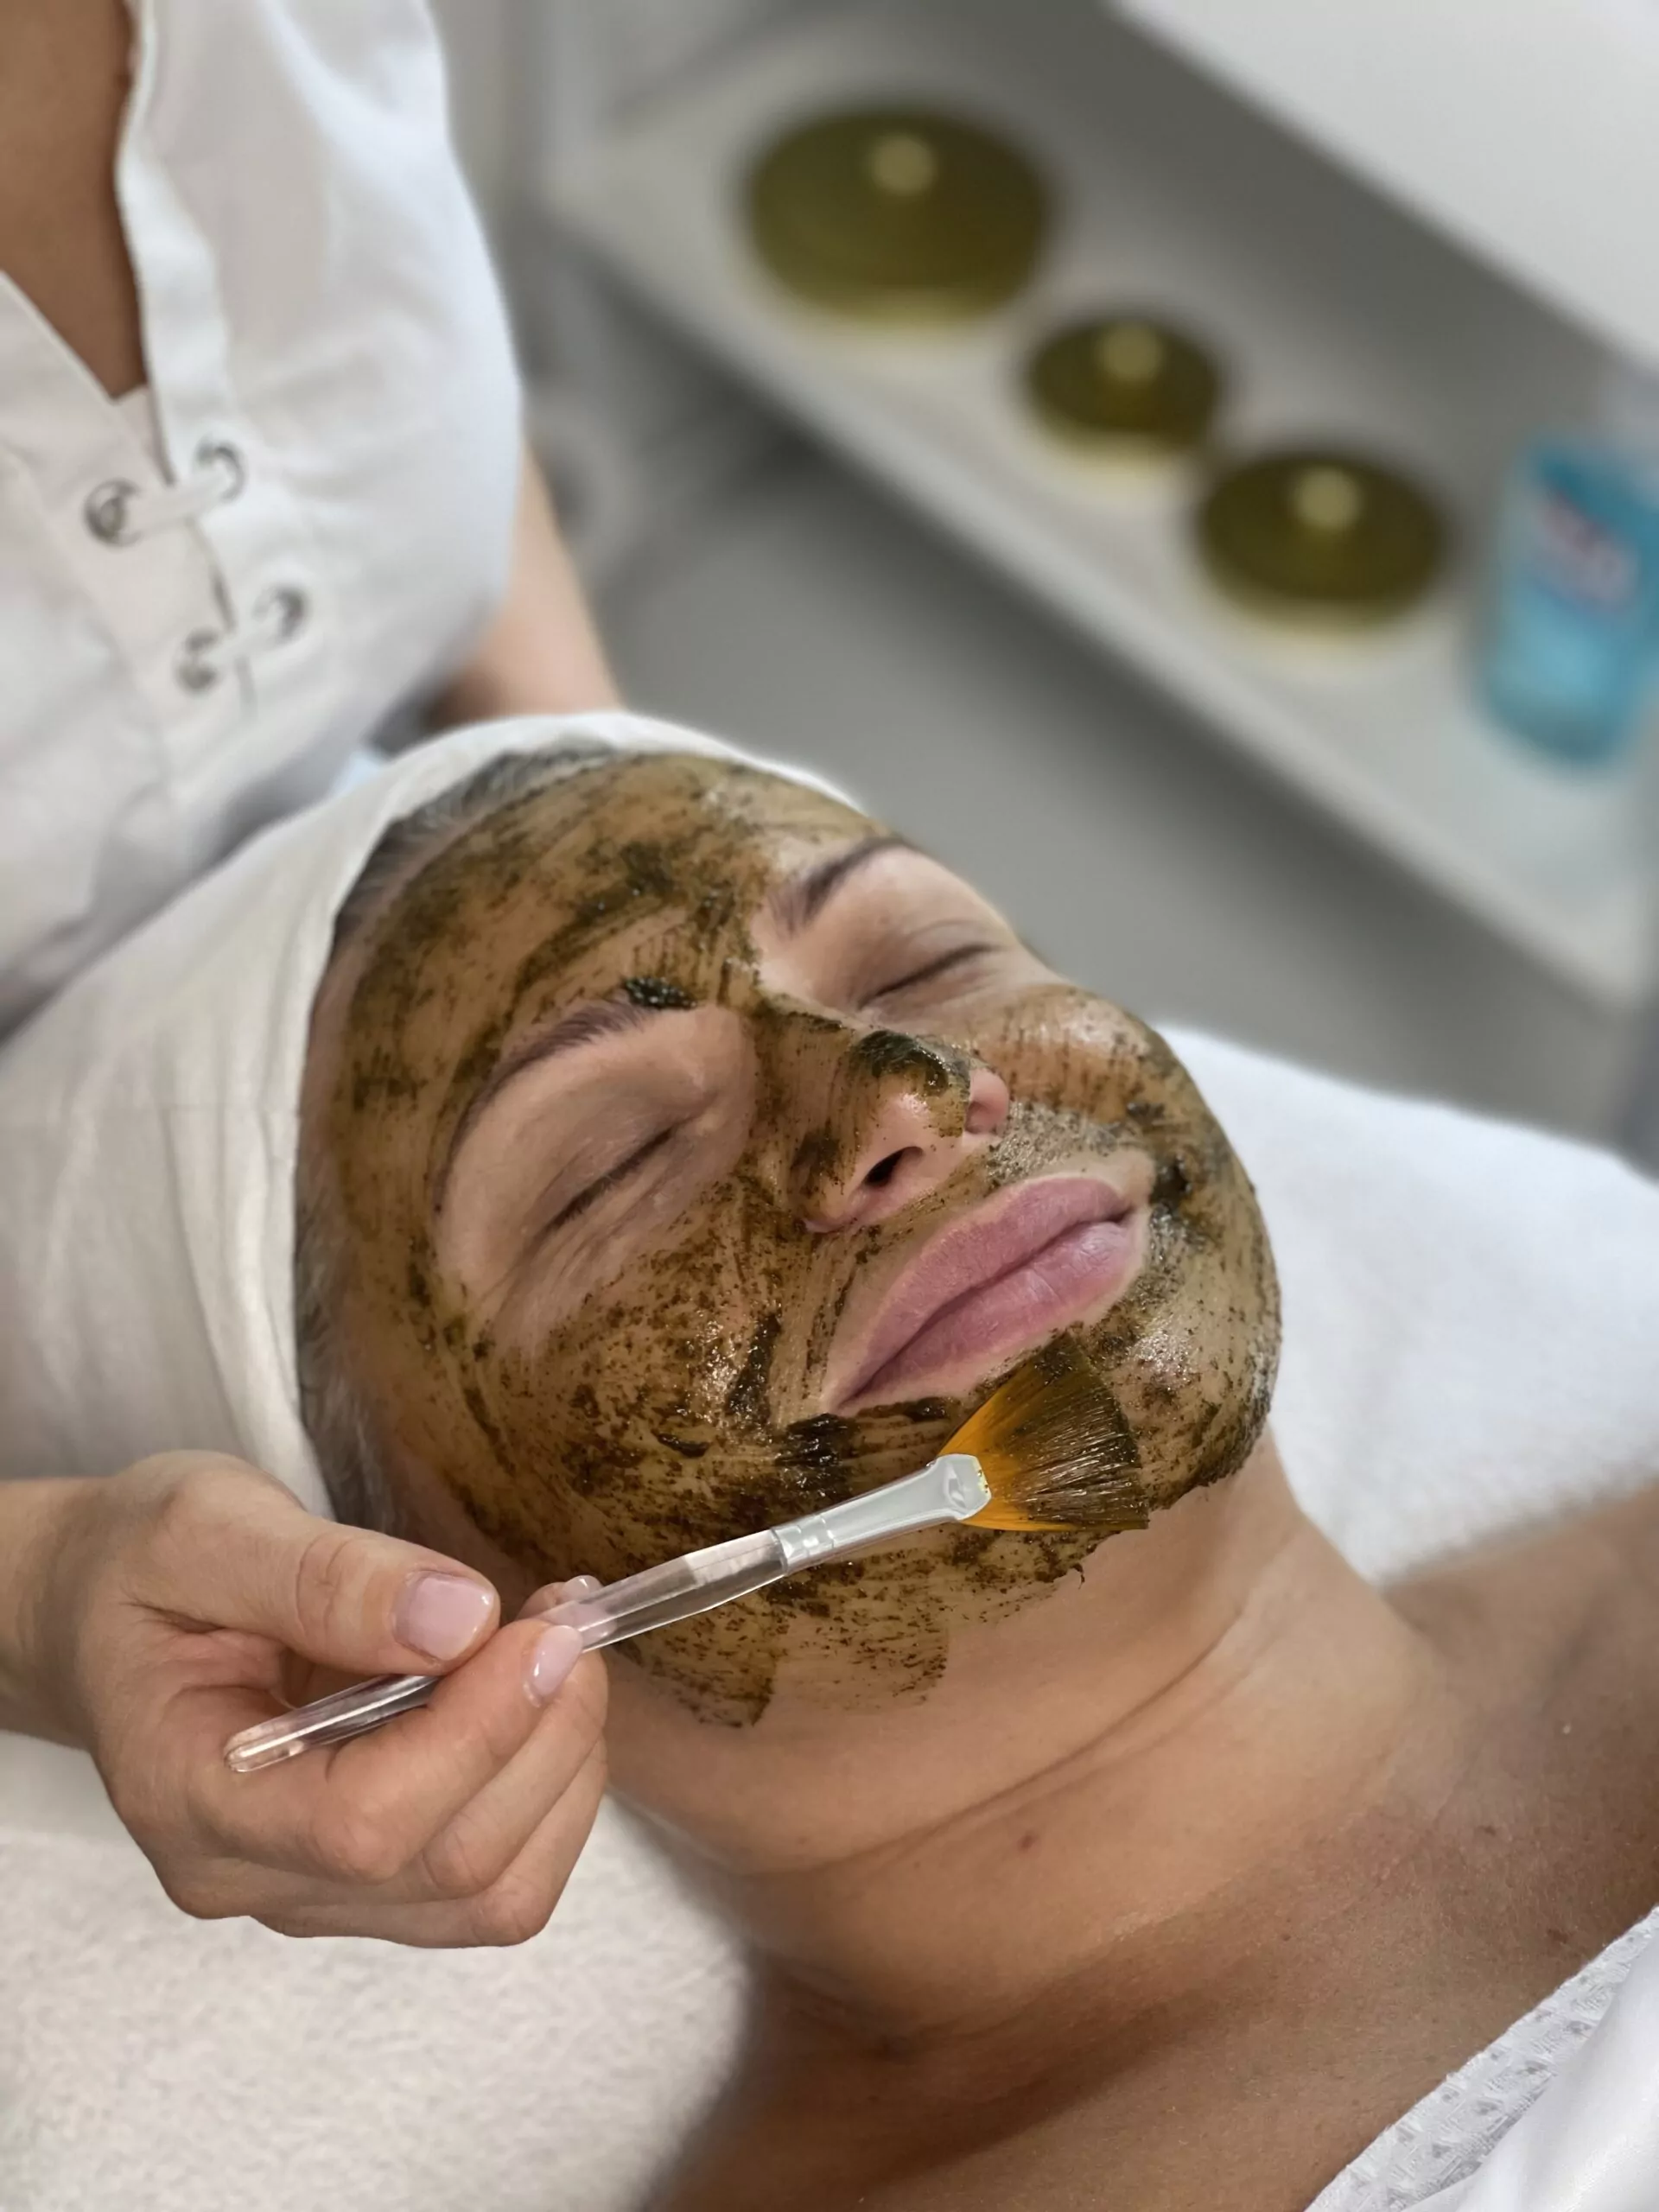 The benefits of facials: Learn about how regular facials can improve the overall health and appearance of your skin.